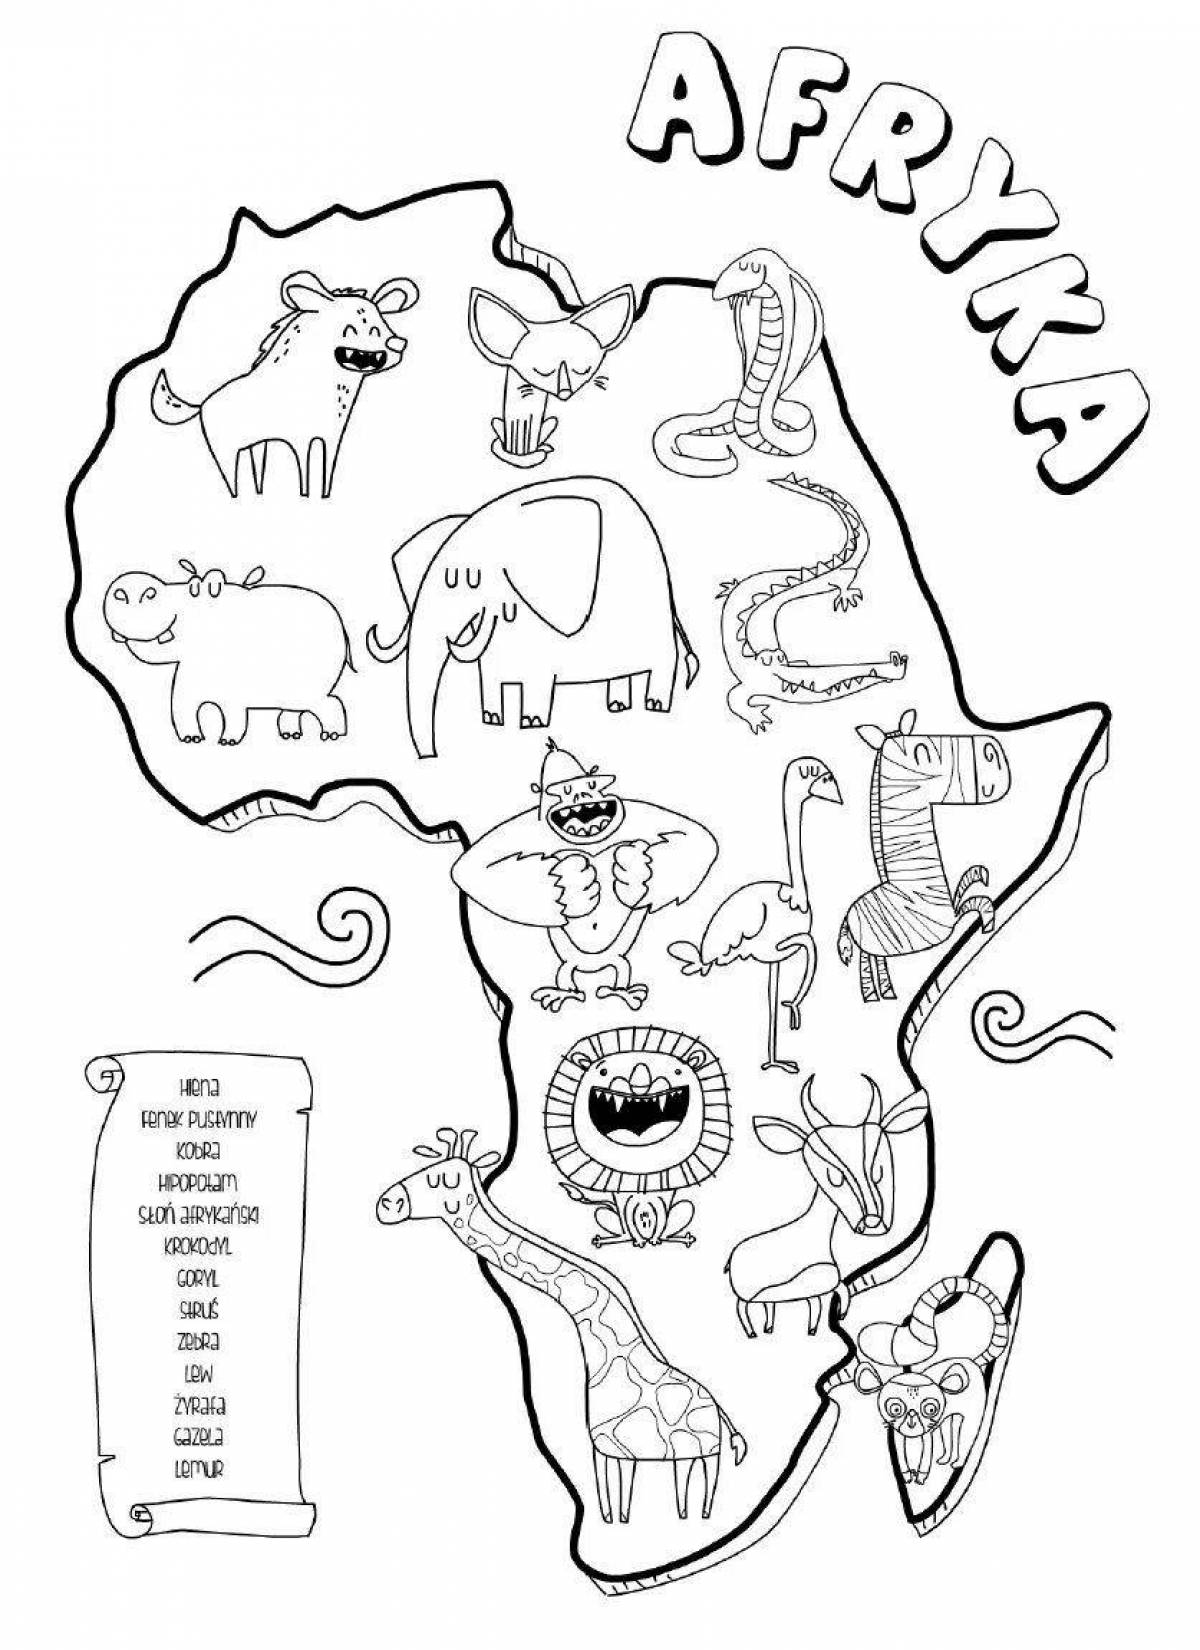 Flawless Africa Map Coloring Page